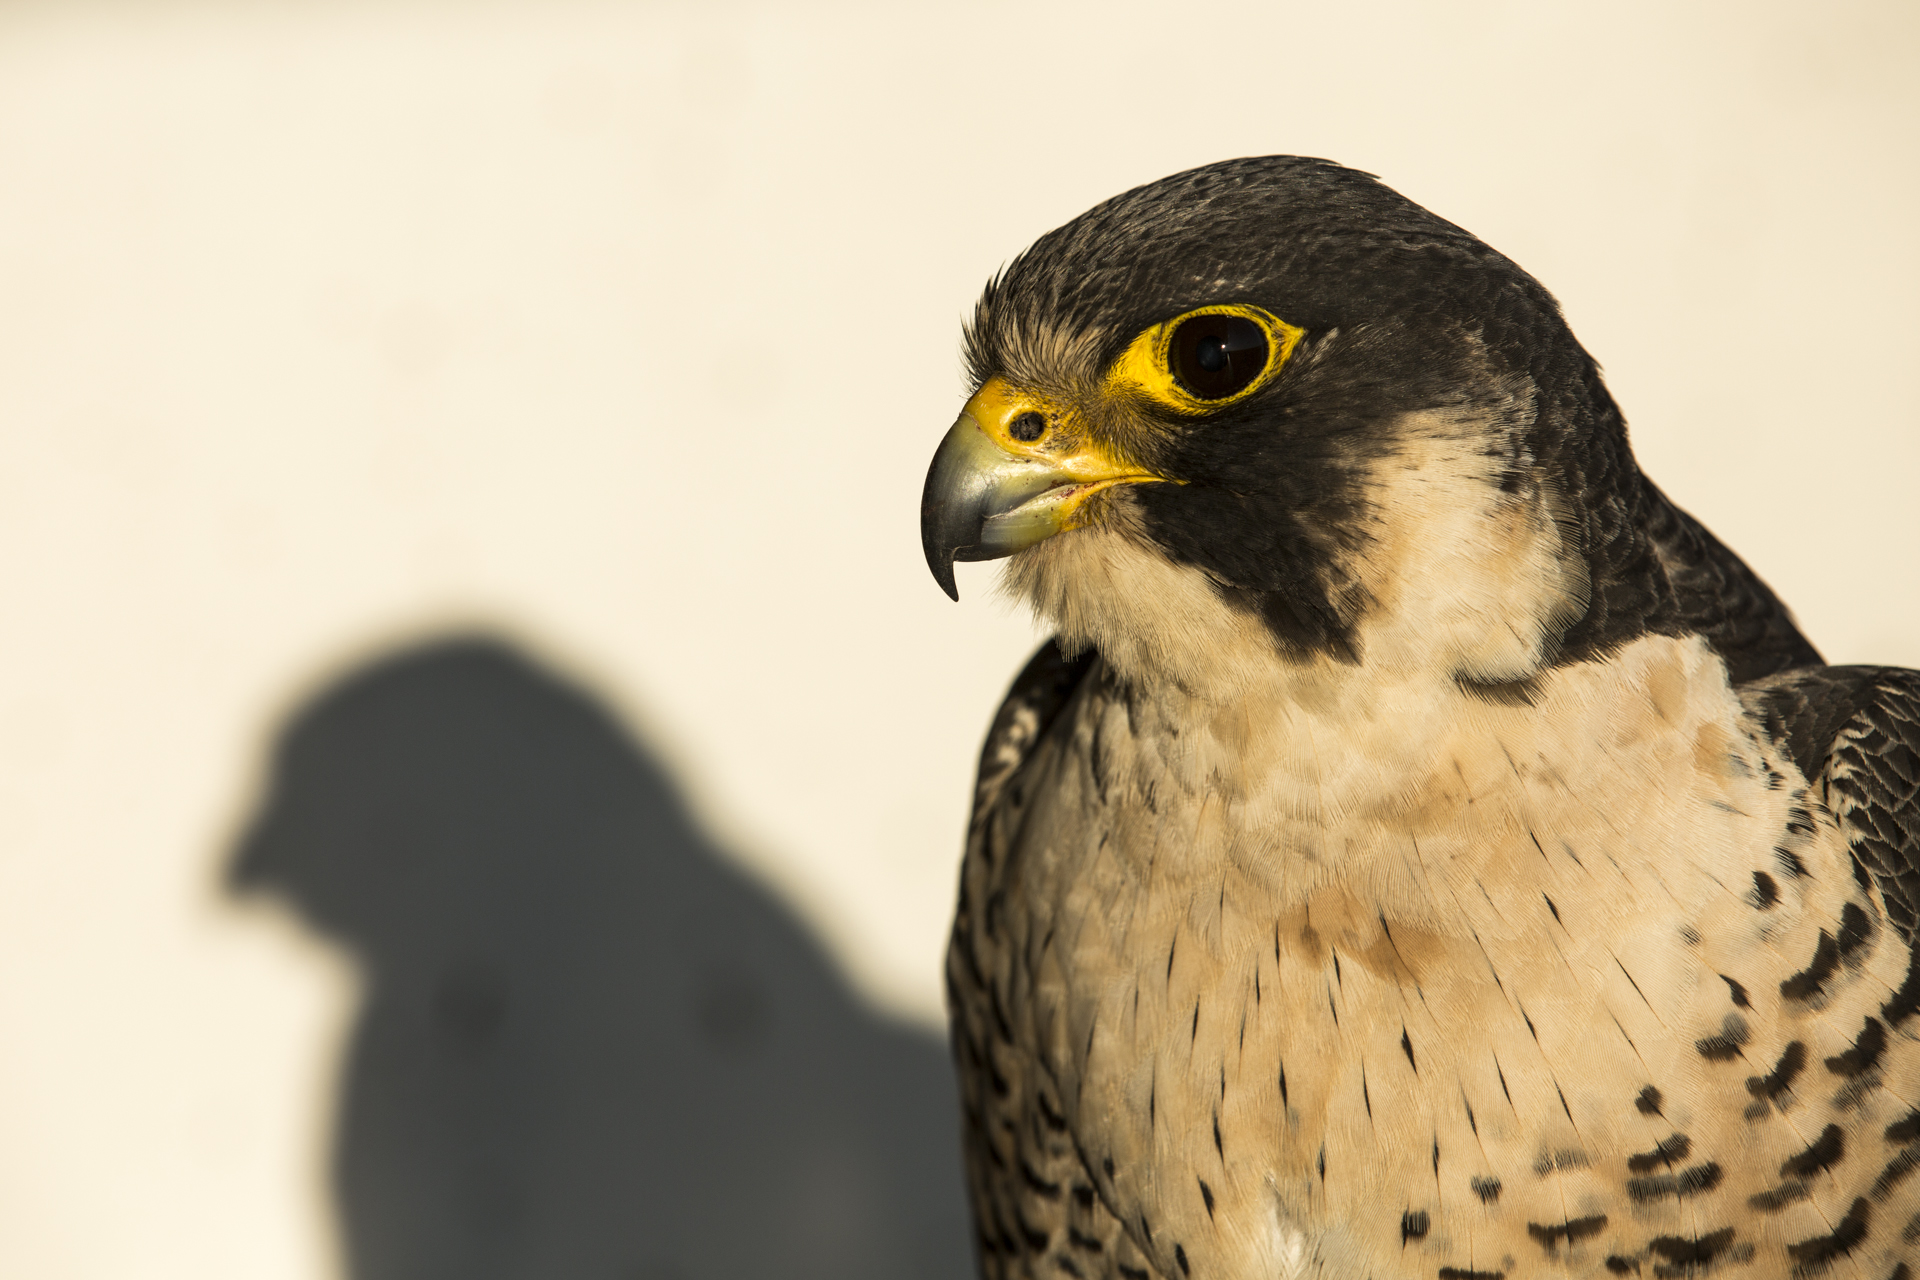  Peregrine falcons are highly proficient predators, built for killing prey with incredible eyesight, razor sharp talons and beaks.&nbsp; 